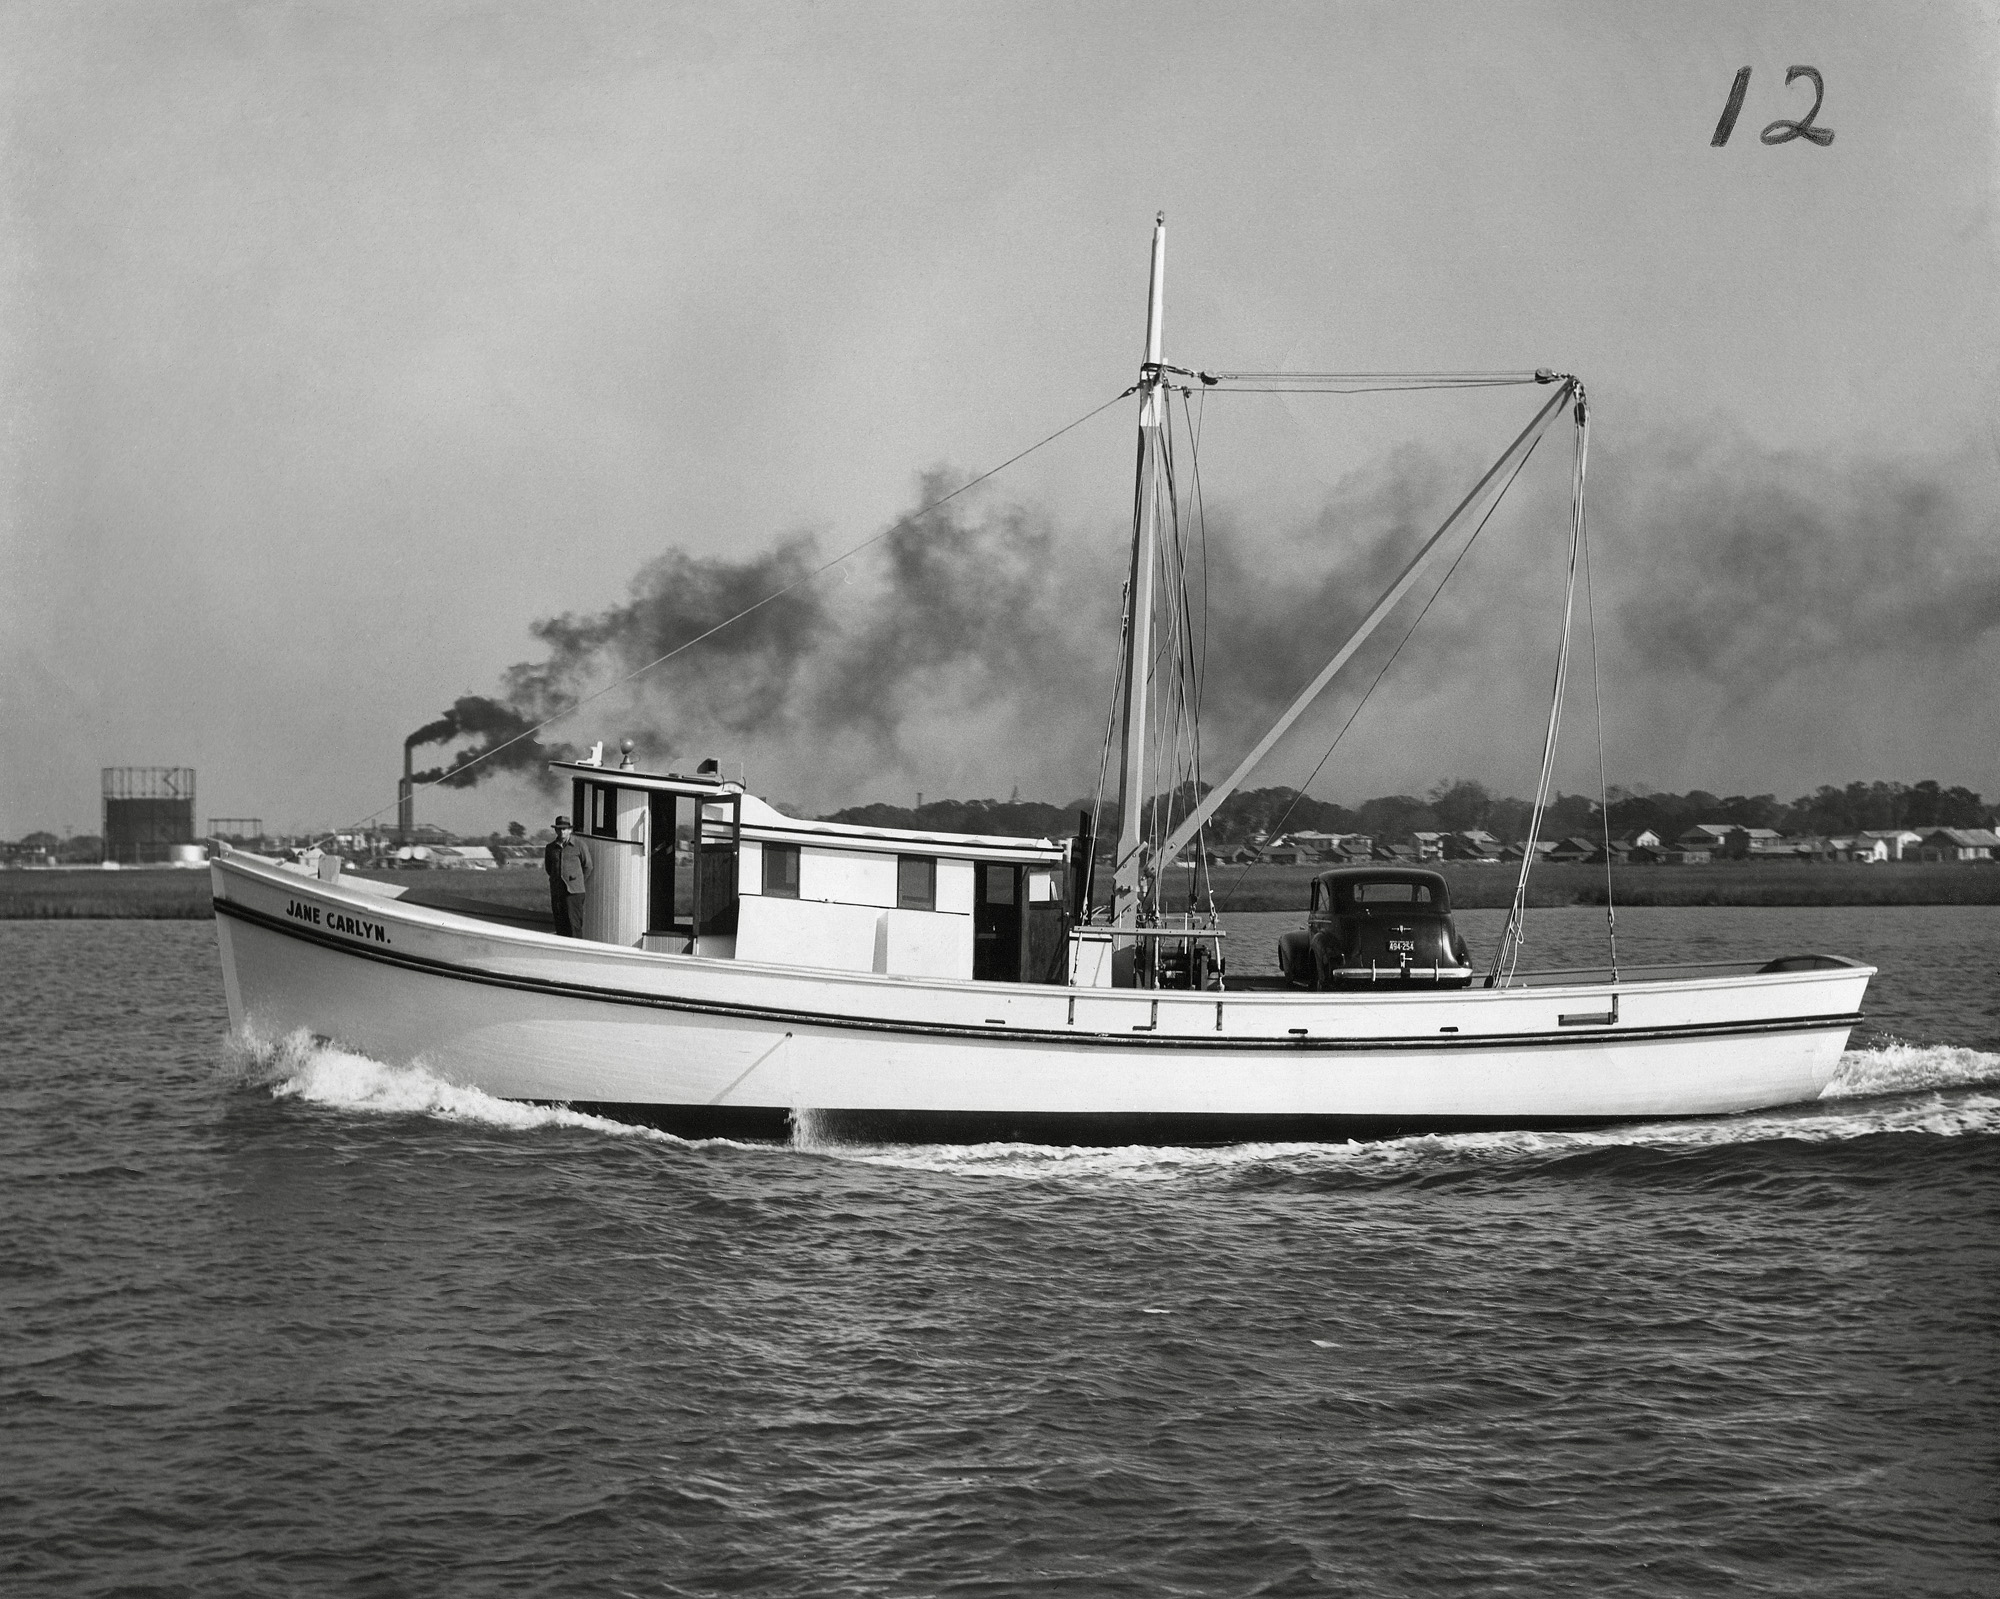 The 'Jane Carlyn' is shown here freshly launched and leaving the Diesel Engine Sales Co. docks in St. Augustine, Florida. Roland Styron stands at the bow of his brand new 65' wooden shrimp boat. Capt. Styron had a fish house in Hobucken, N.C. beside the R.O. Mayo fish house and later operated a fleet of shrimp boats that travelled as far south as the Florida Keys. Diesel Engine Sales Co. (DESCO) was a the leading builder of shrimp boats in the US and built 2272 wooden fishing vessels between 1943 and 1982. Photo taken in 1944. View full size.